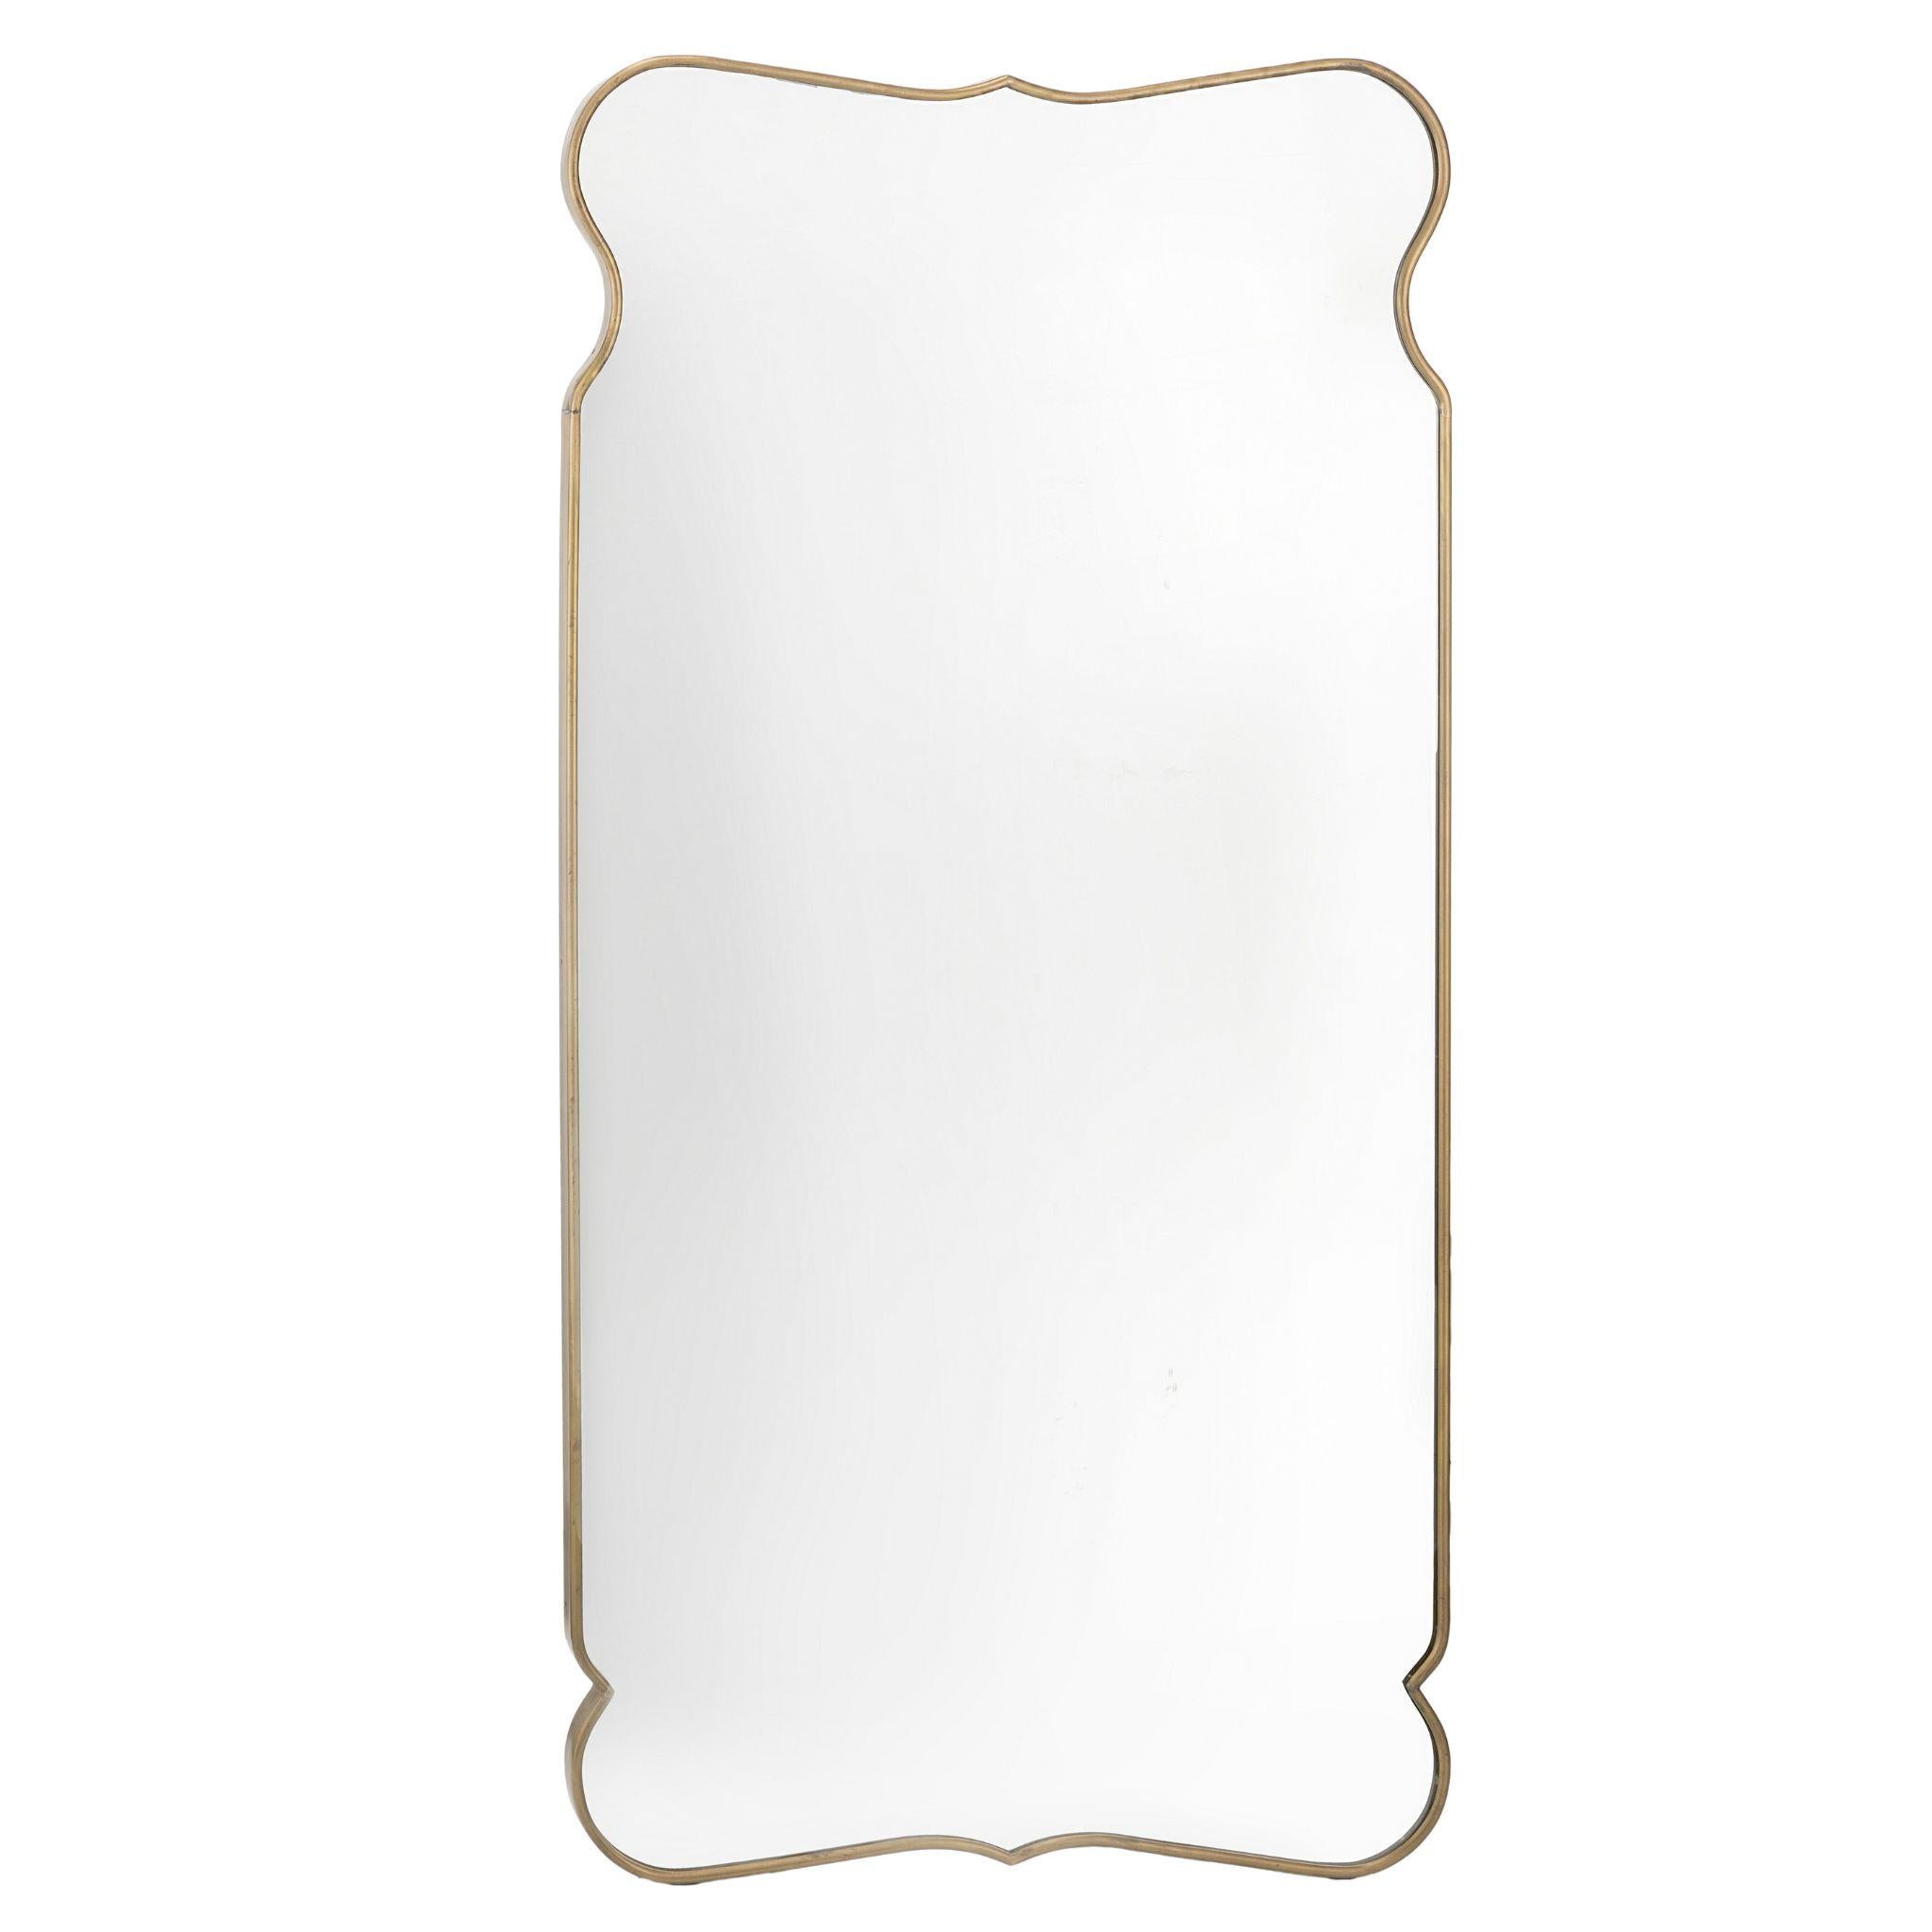 Large mirror with sinuous shape and vintage flavor, reminiscent of the mirrors of the great Italian country houses of the past, those of the master bedrooms with an elegant but a bit 'shabby, terracotta floors, wrought iron beds and antique